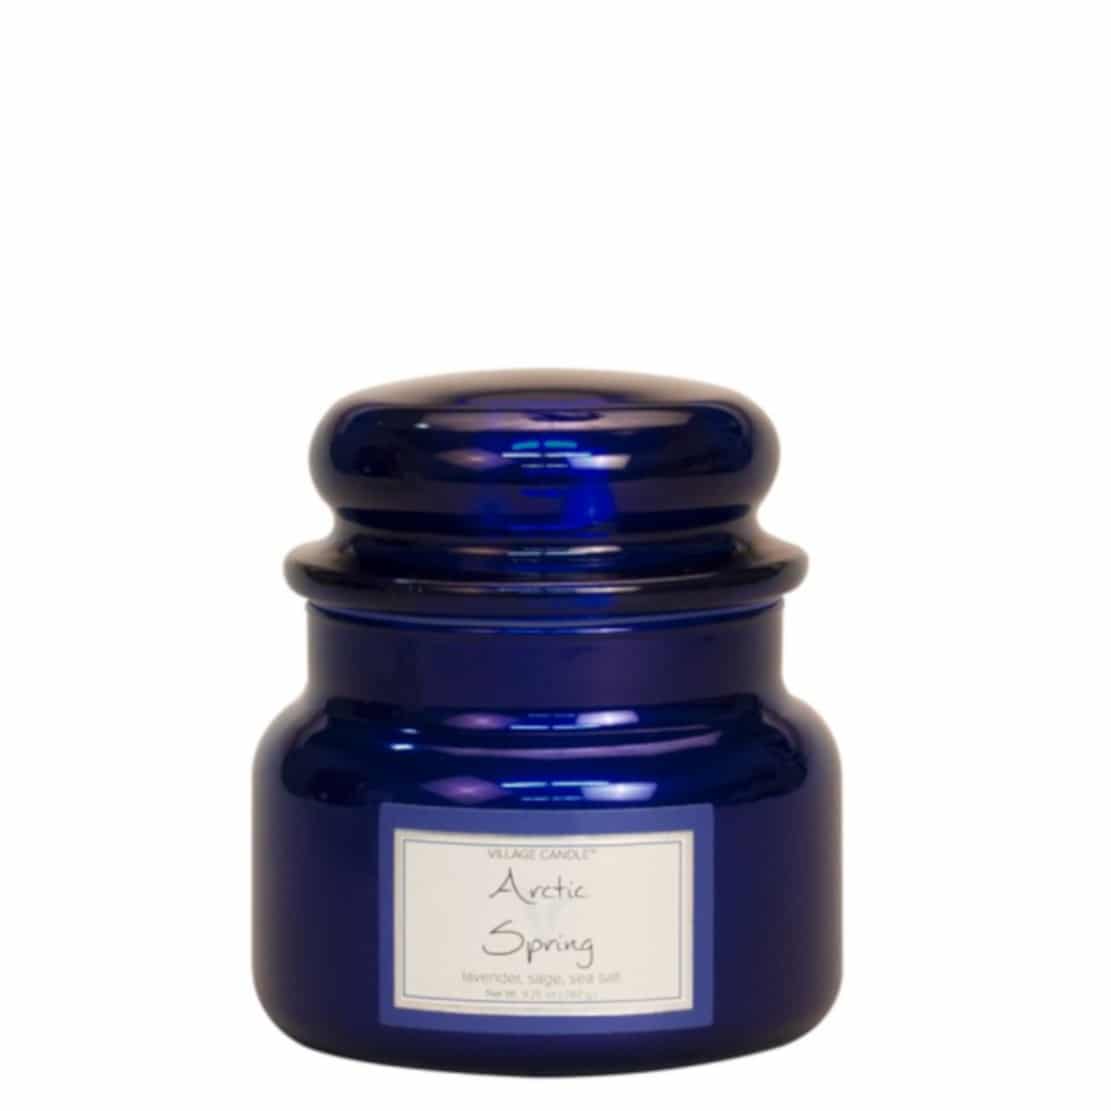 Village Candle Artic Spring Small Jar 262g